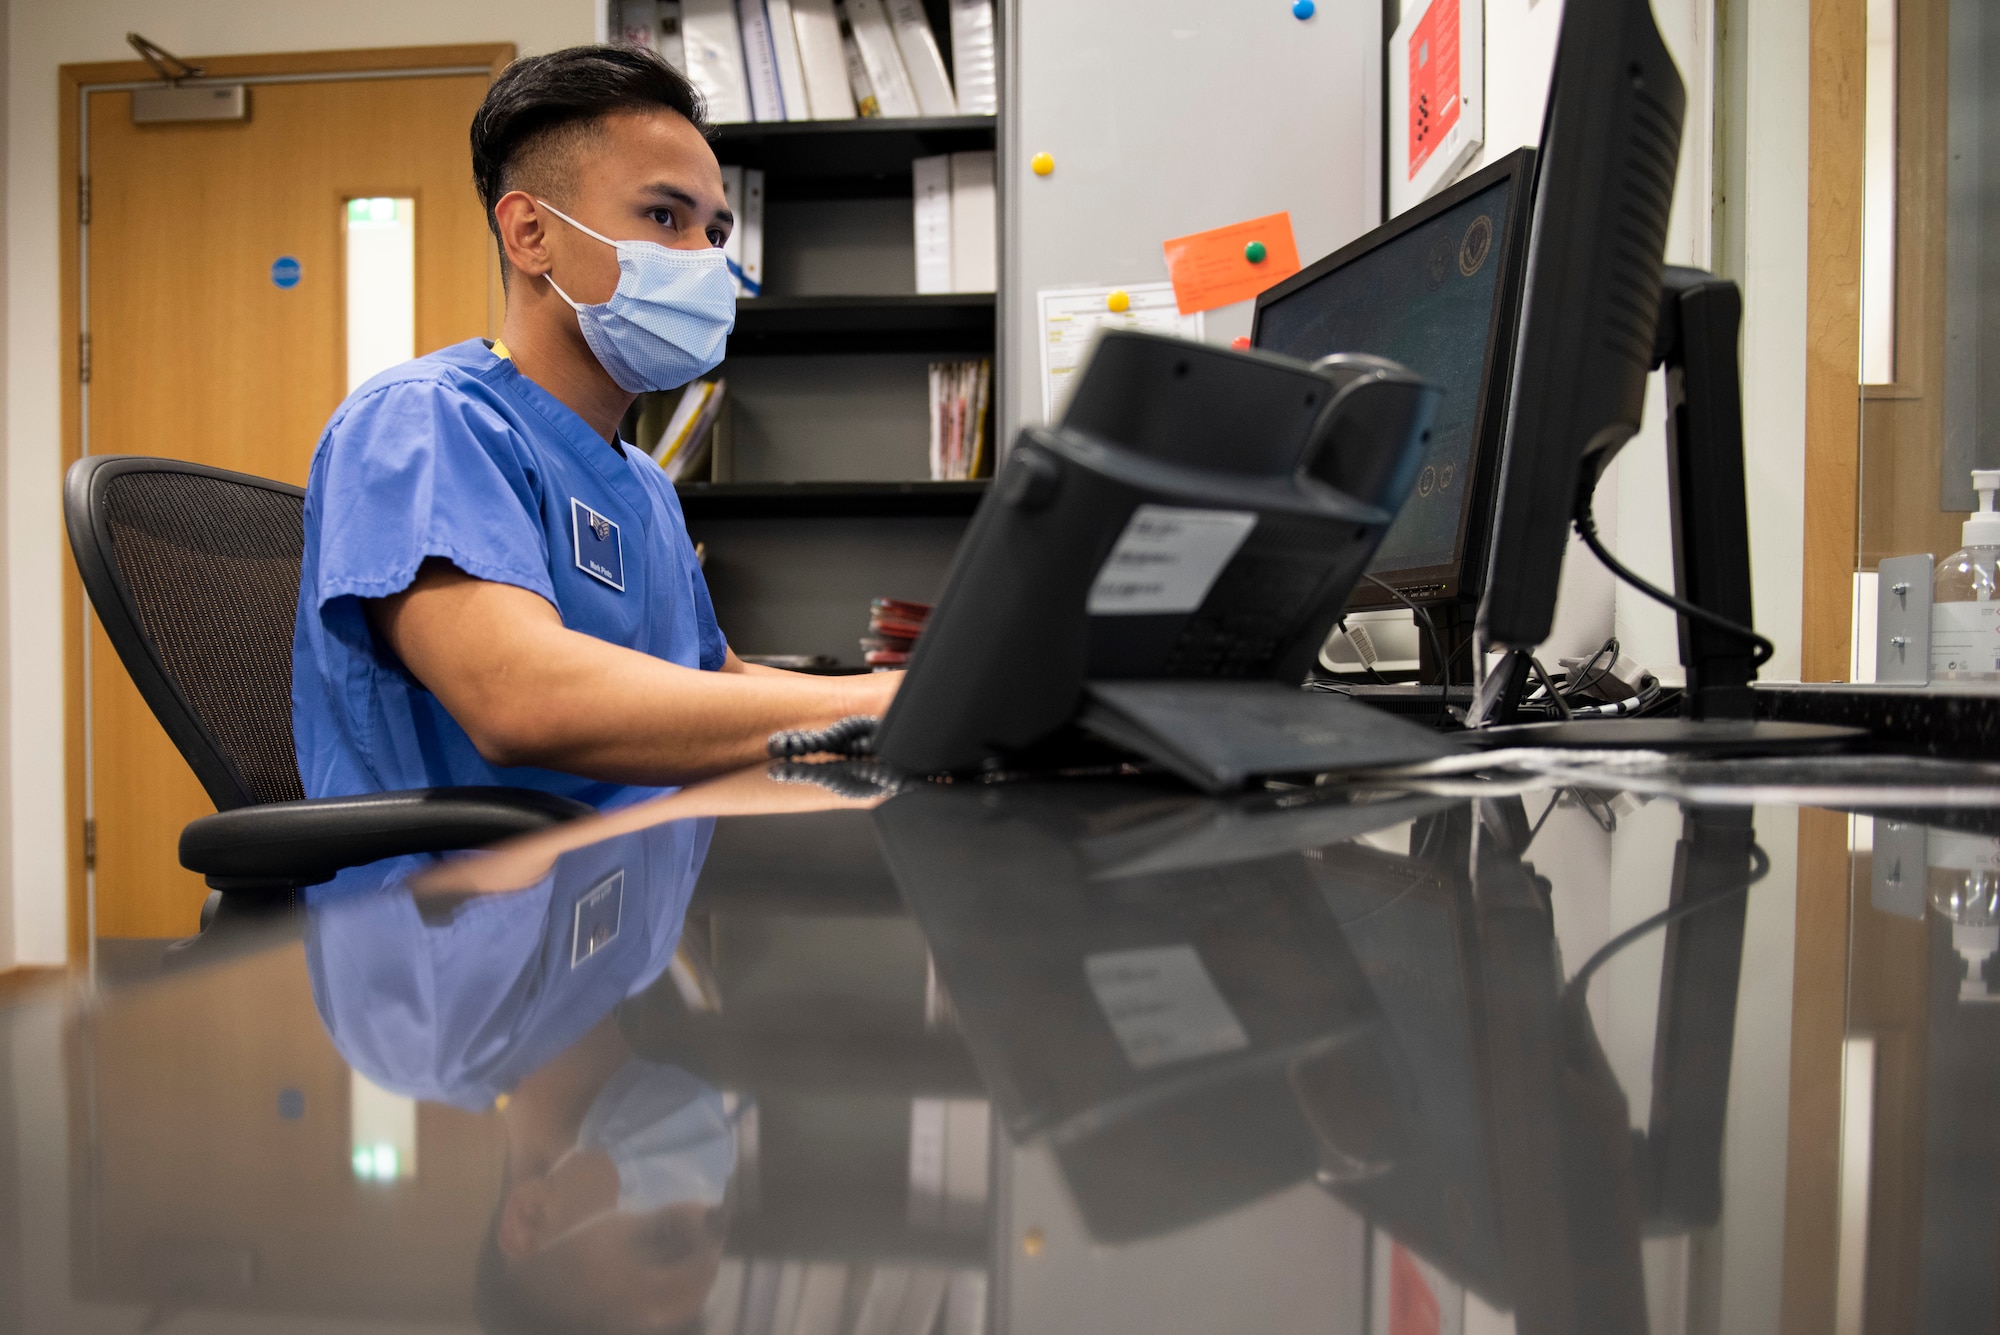 U.S. Air Force Senior Airman Mark Pinto, 423rd Medical Squadron dental technician, schedules dental patient appointments ​at Royal Air Force Alconbury, England, May 11, 2021. (U.S. Air Force photo by Senior Airman Jennifer Zima)